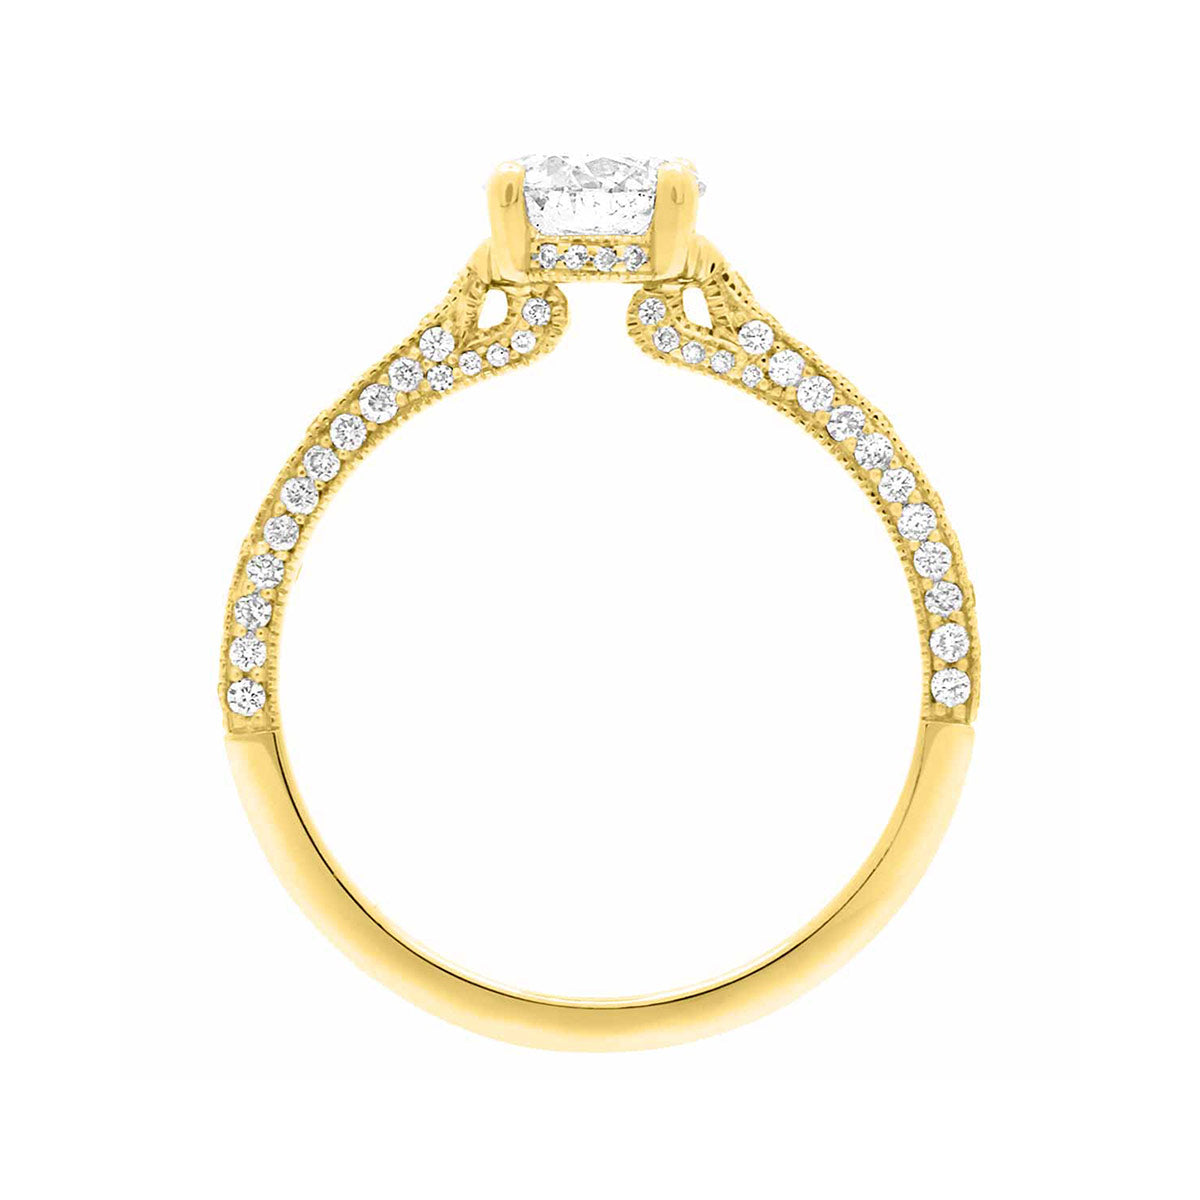 Thin Band Solitaire Ring with diamonds on sidewalls in yellow gold pictured in an upright standing position